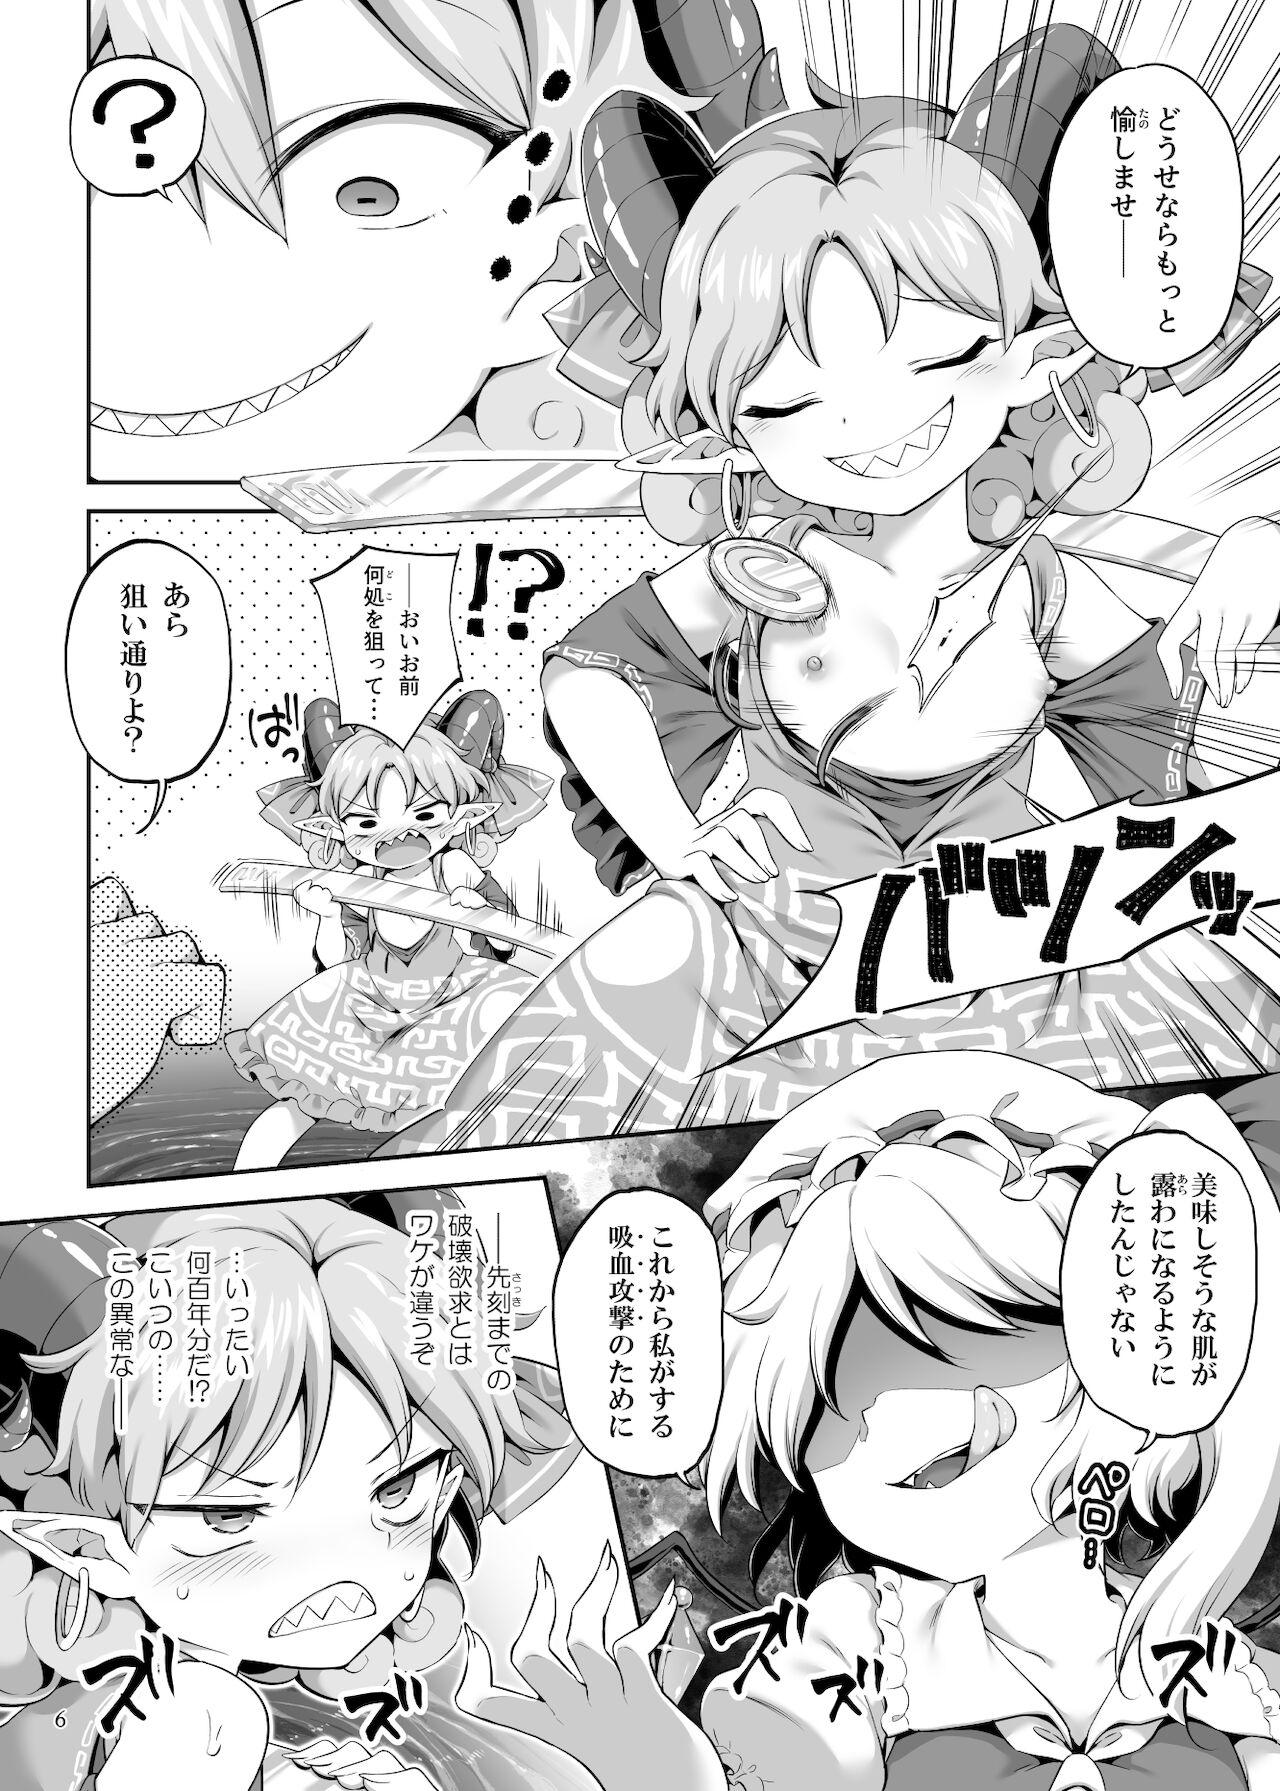 Cock Suckers 吸われて駄目なら吸ってみろ! - Touhou project Transex - Page 6